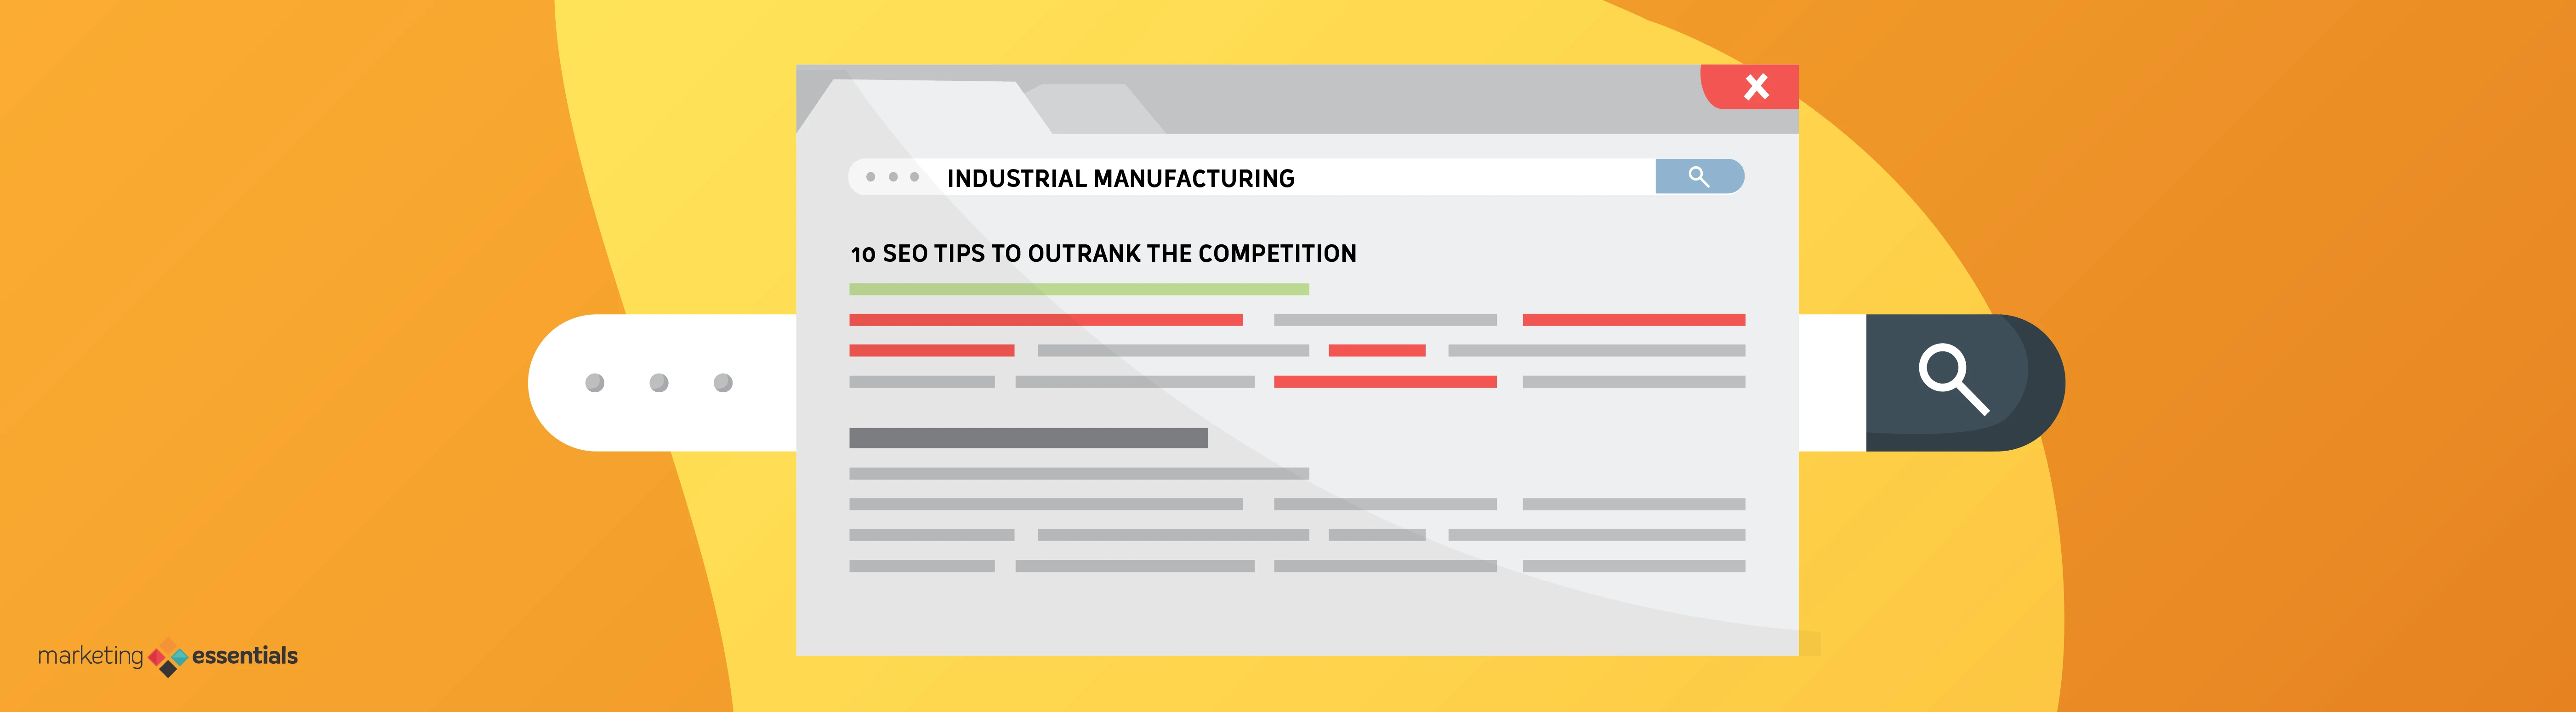 SEO for Industrial Manufacturing - 10 Tips to Outrank the Competition